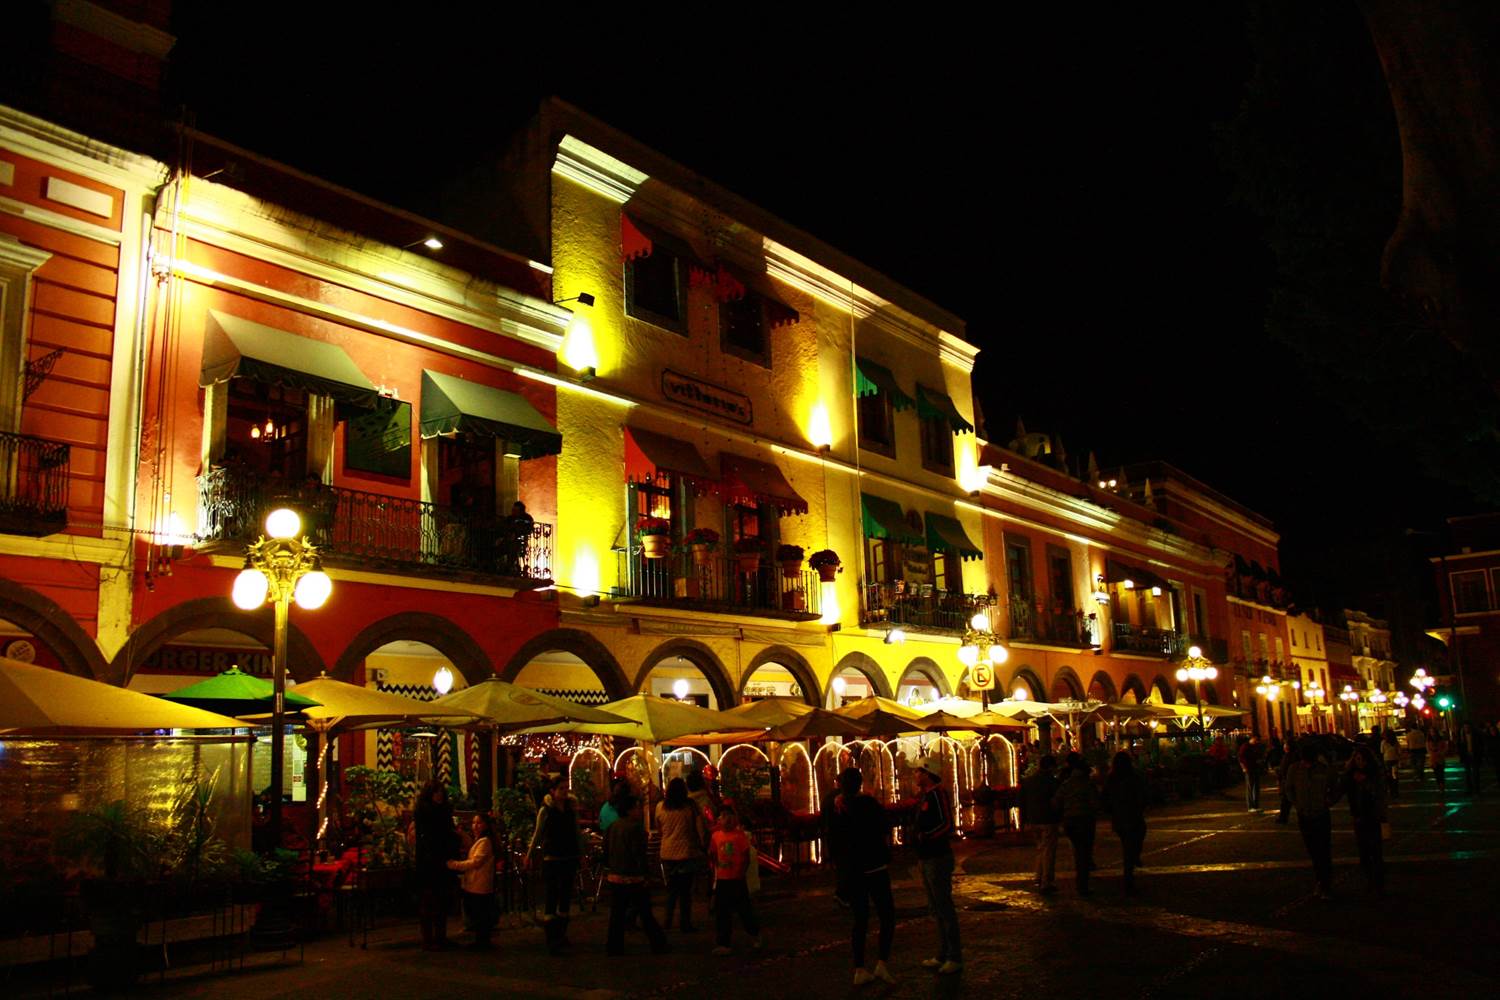 Colorful well-preserved buildings in Puebla´s centro histórico